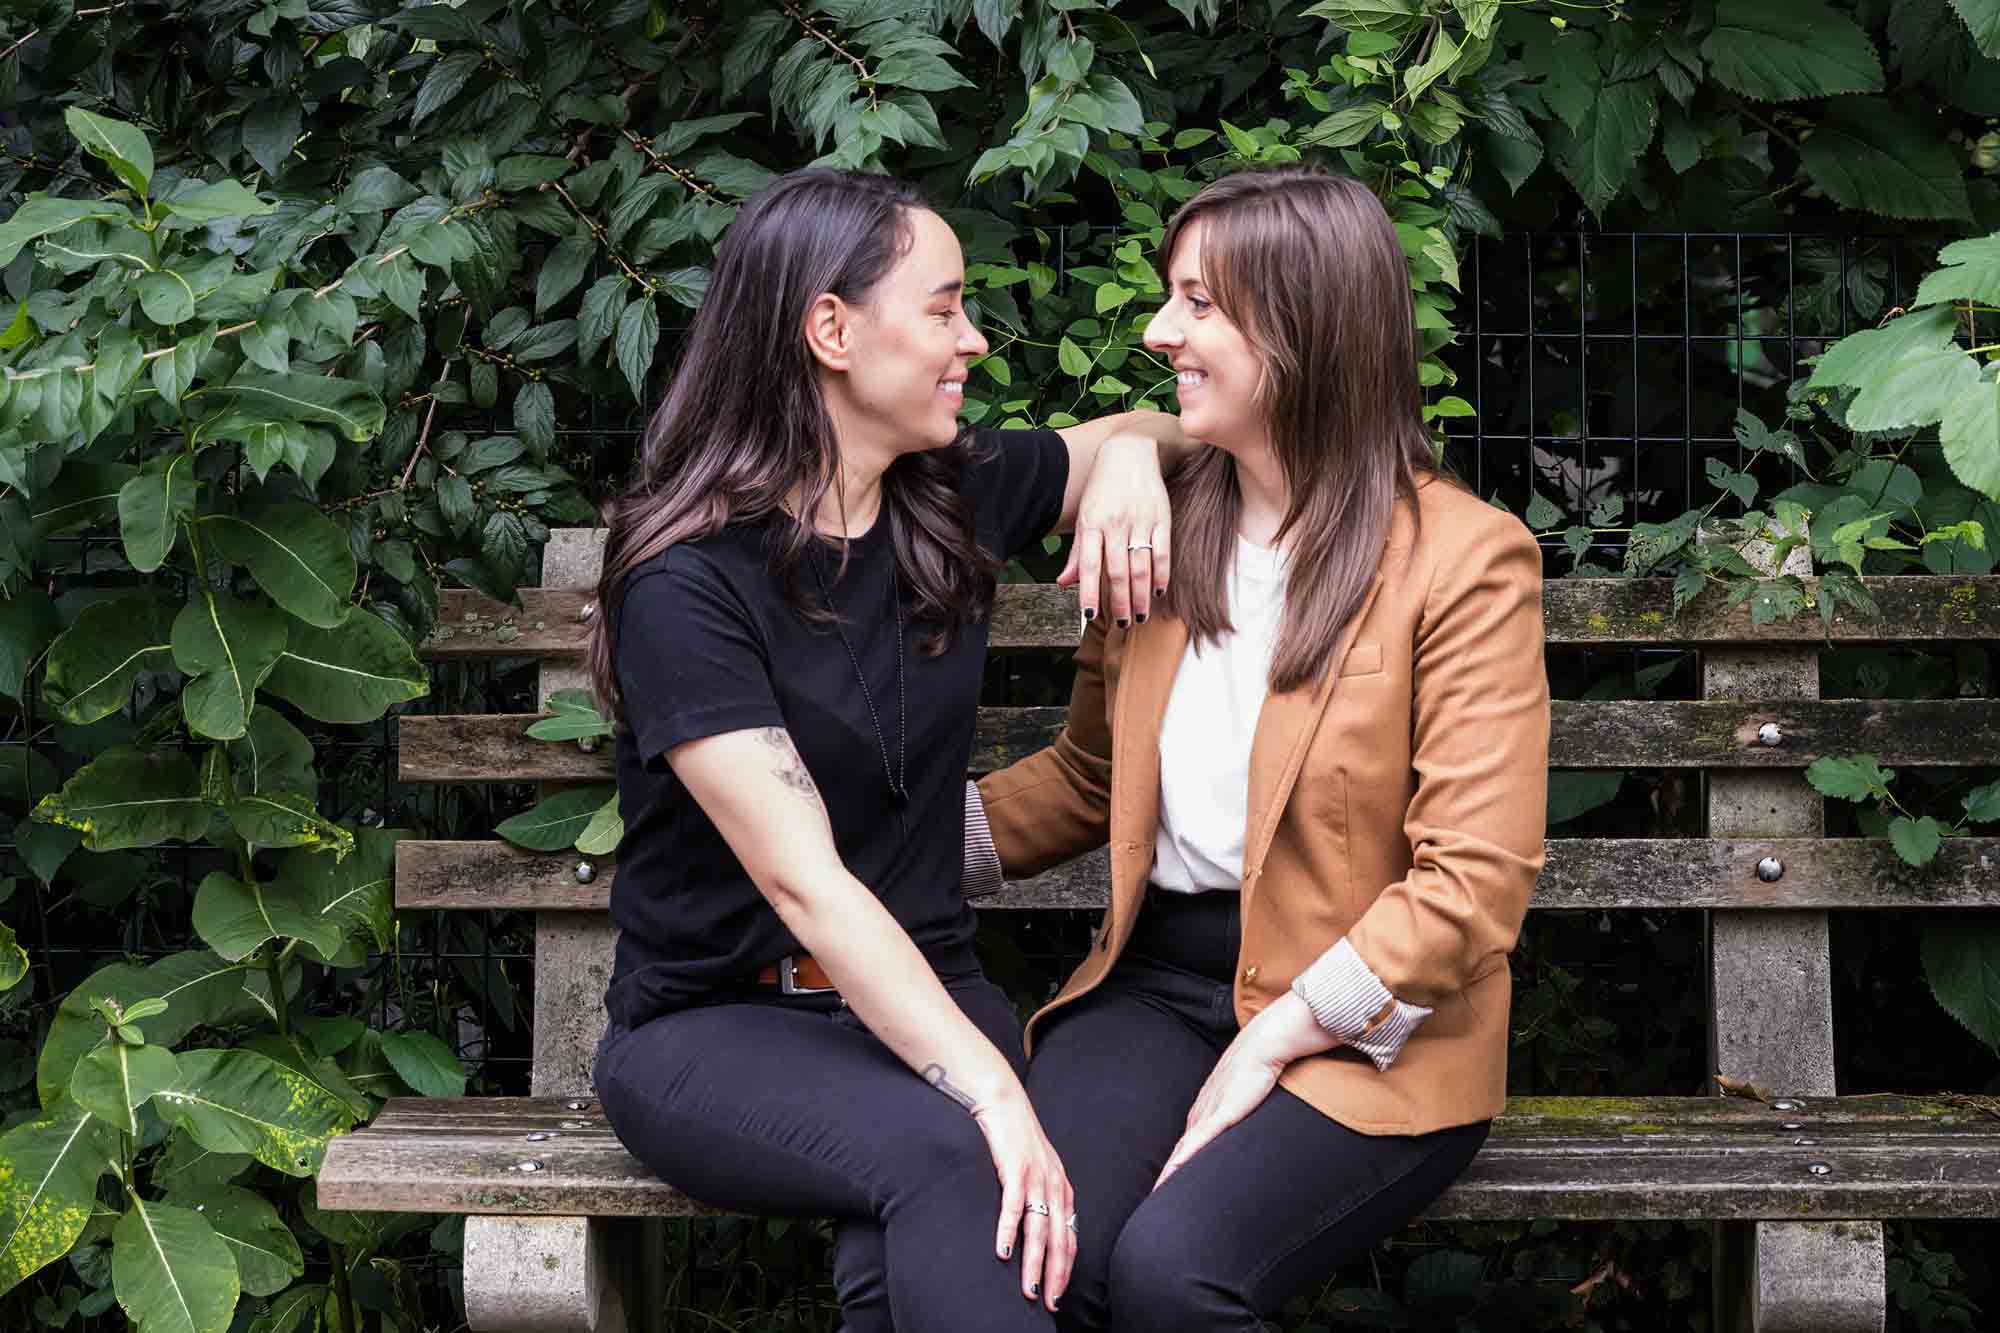 Two women sitting on a bench in front of green foliage in Riverside Park for an article on how to produce a movie-themed surprise proposal